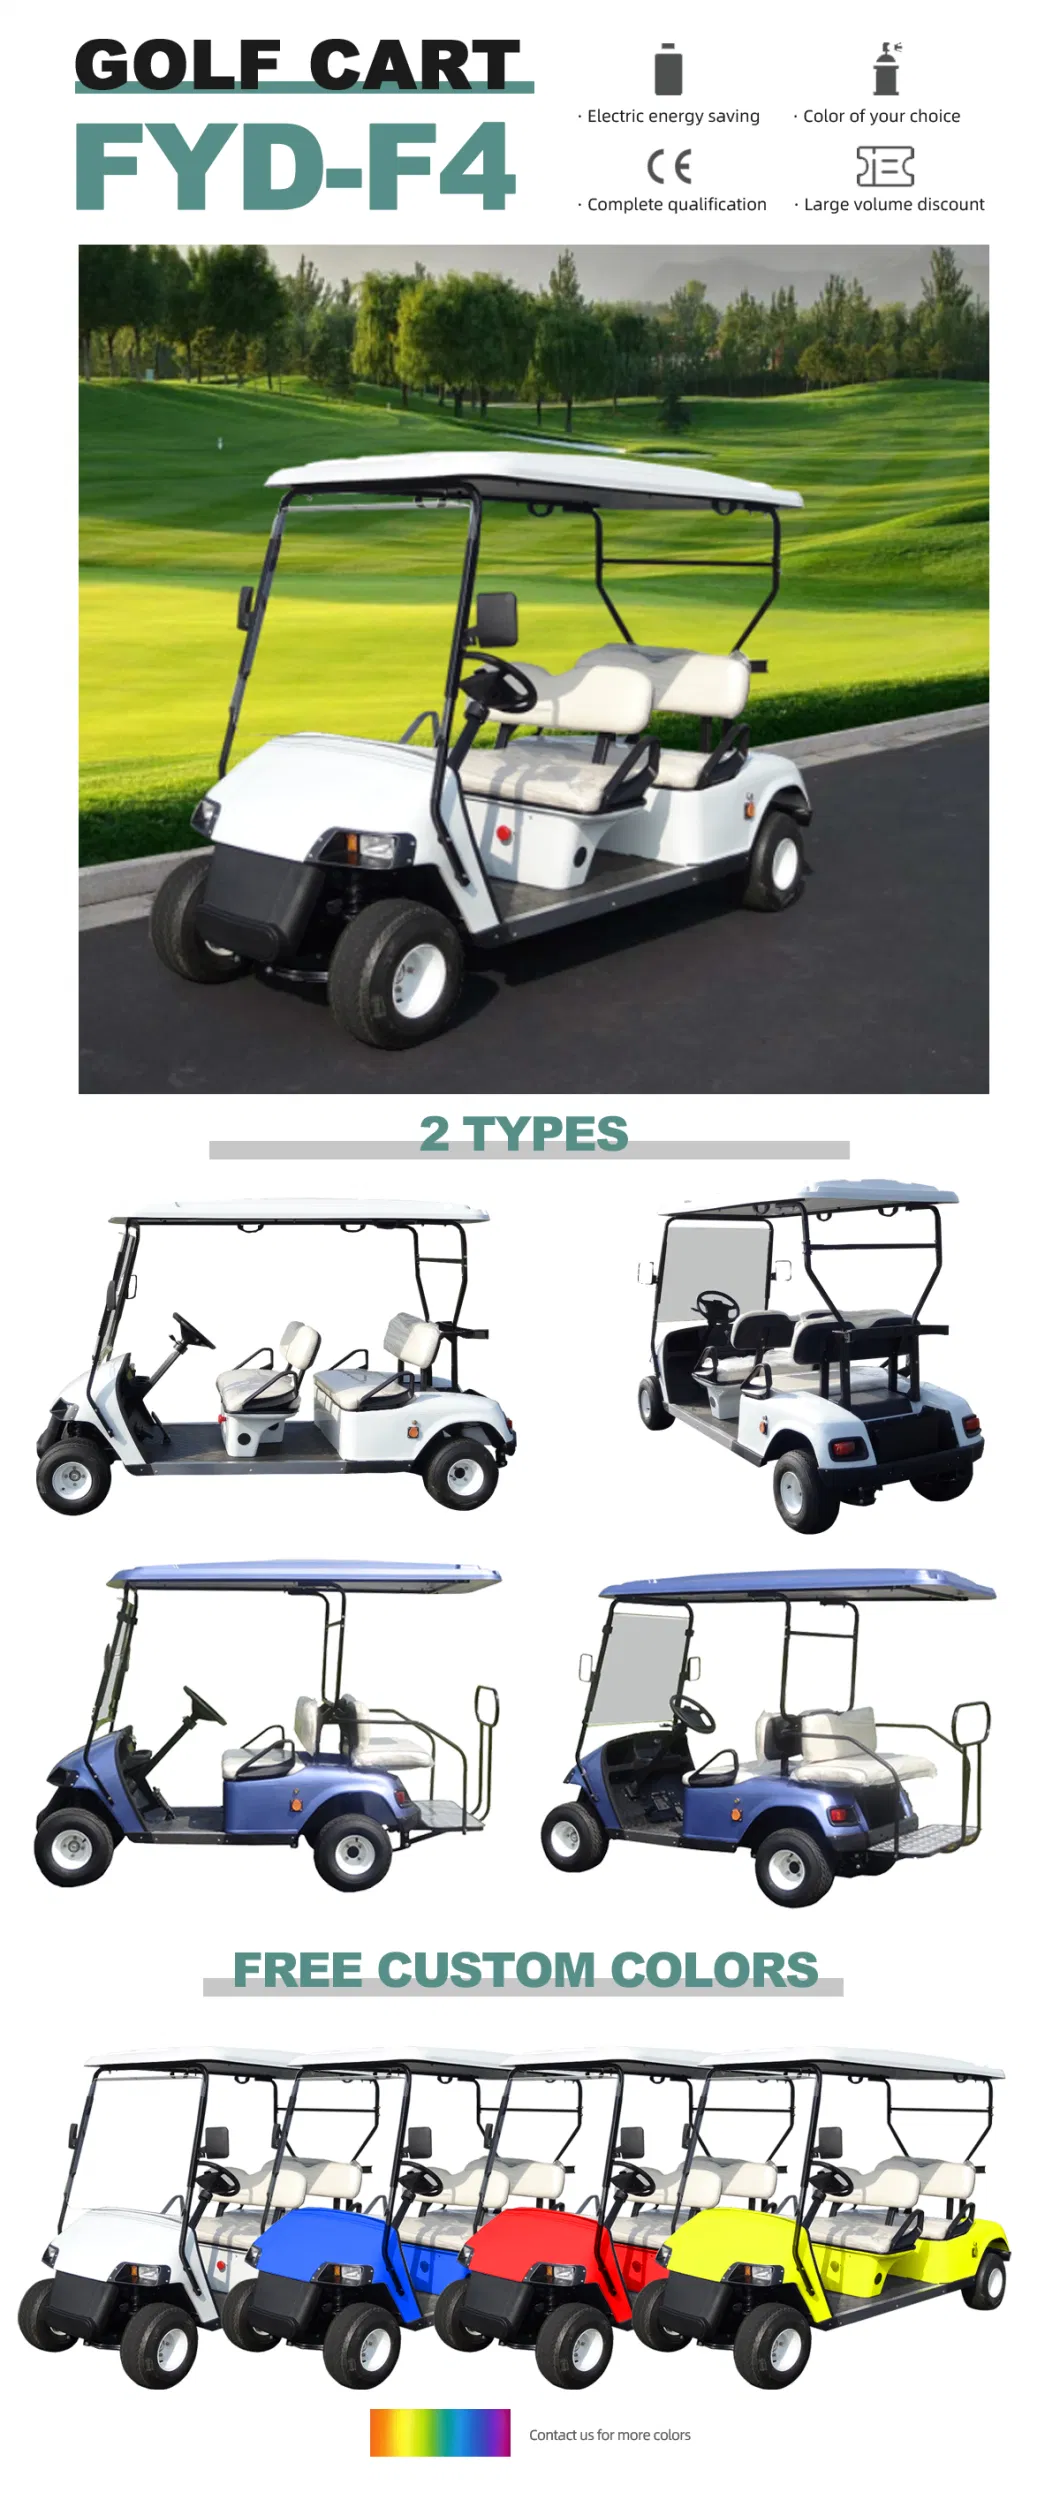 4 Seat 2 Row Large Storage Space Vintage Golf Carts for Sale